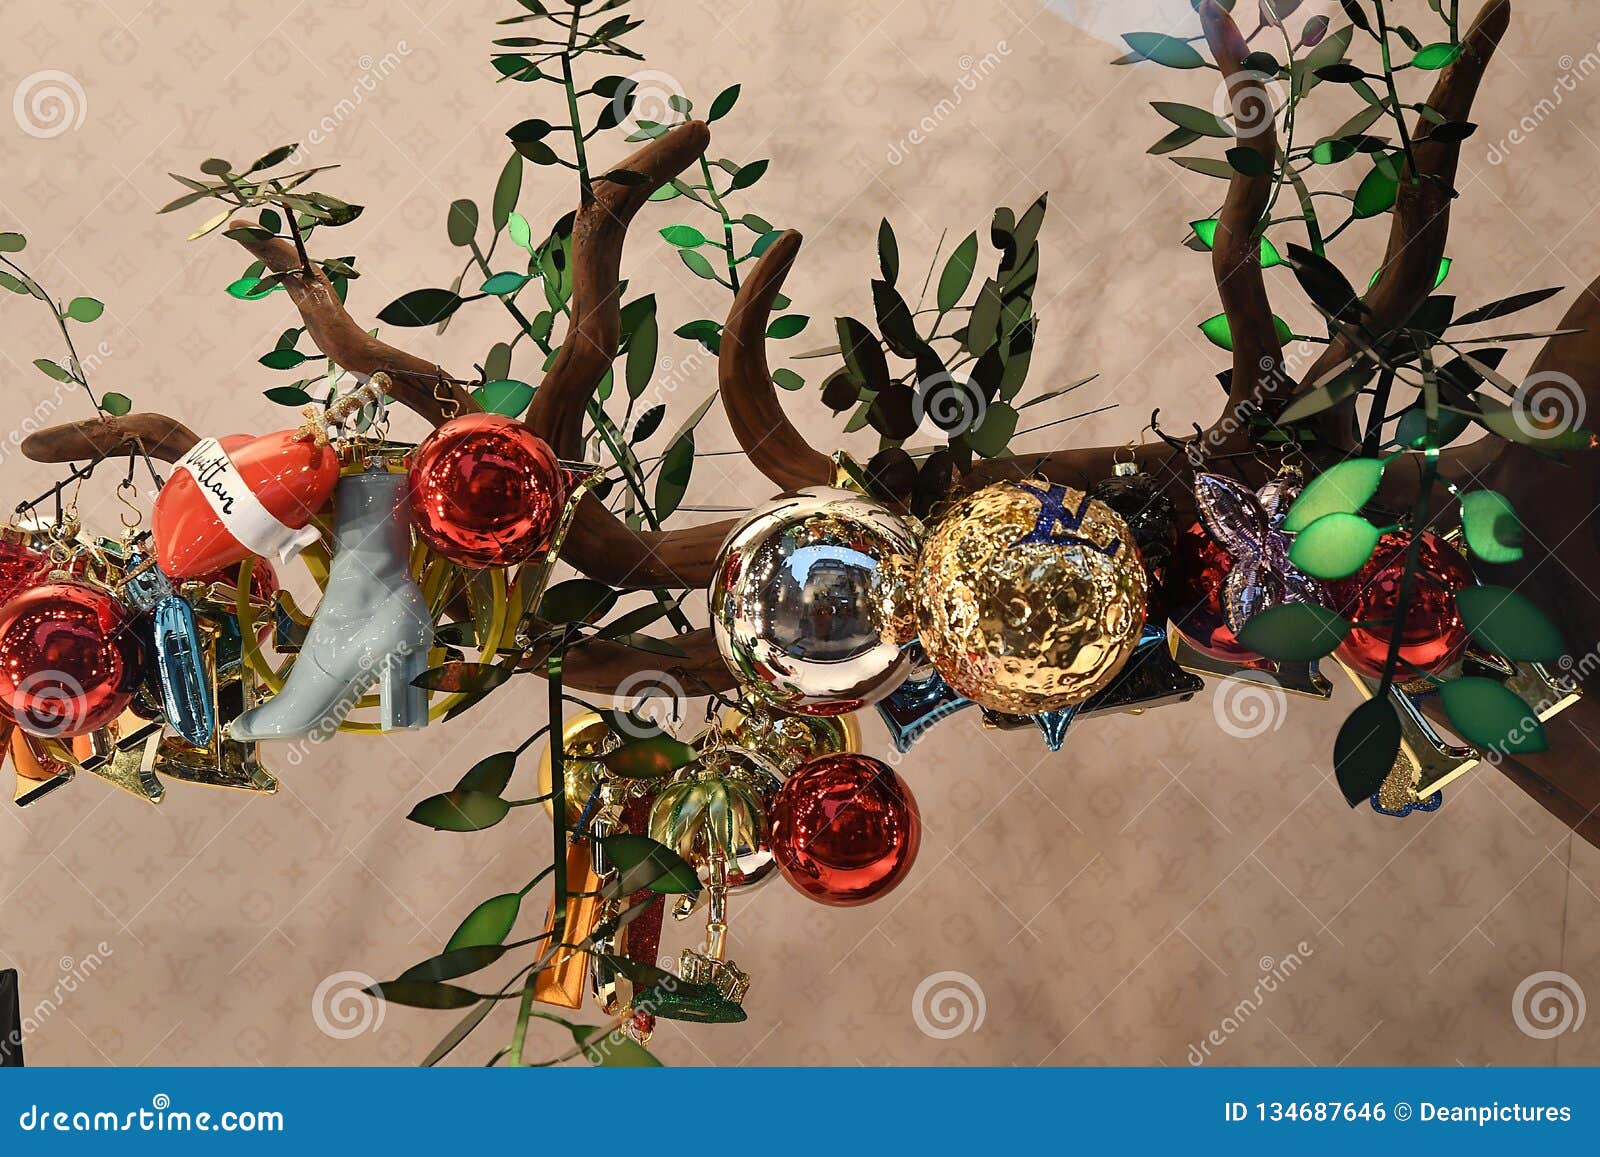 LOUIS VUITTON DECORATES CHRISTMAS with THIER ITEMS Editorial Photo - Image  of finanse, louis: 134687646